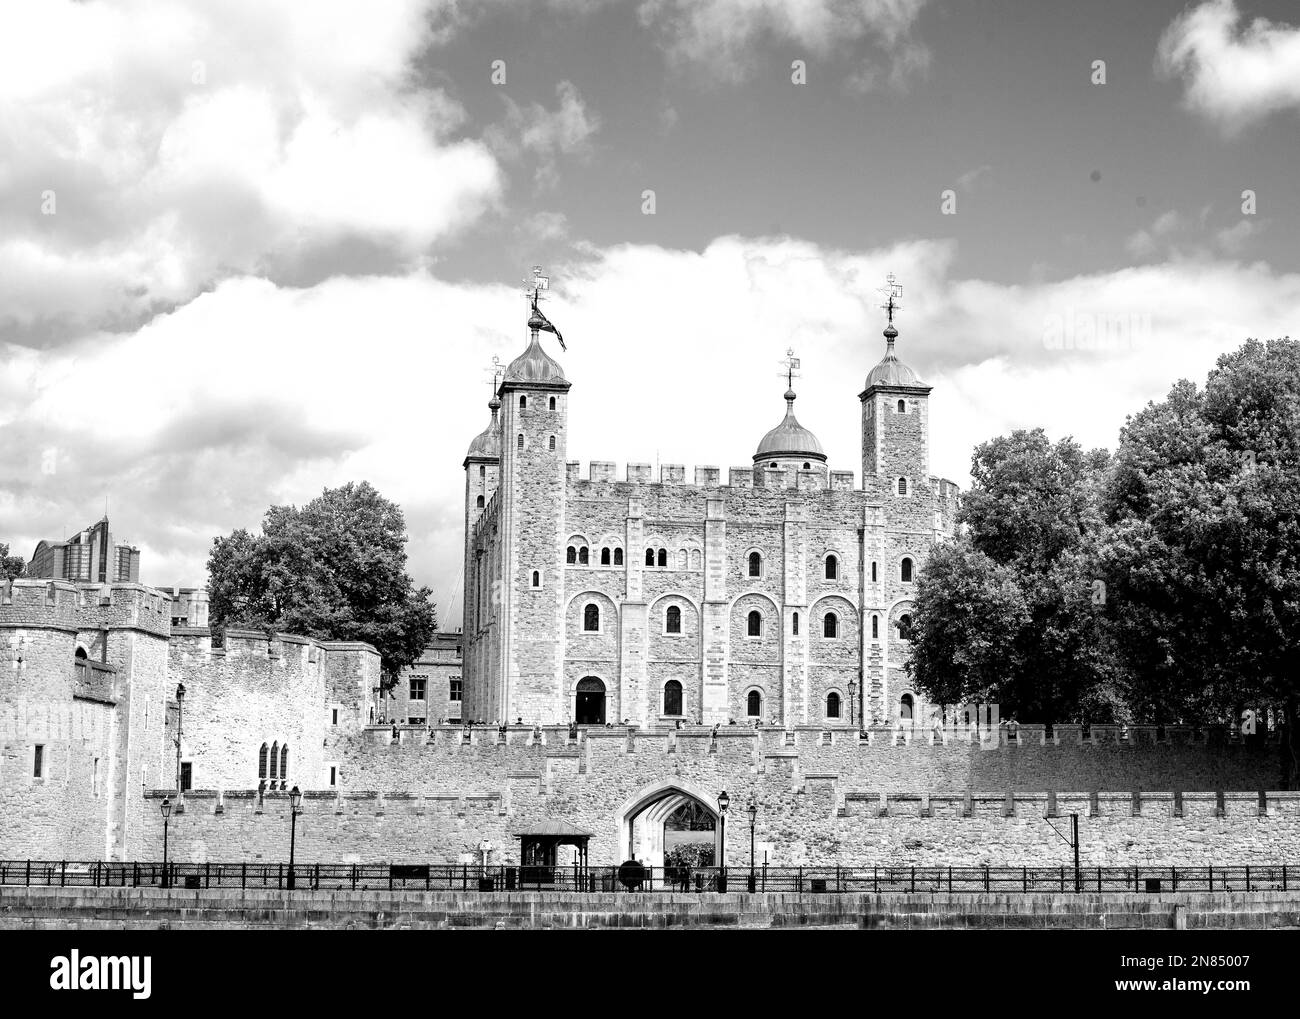 Tower of London with a cloudy sky in black & white Stock Photo